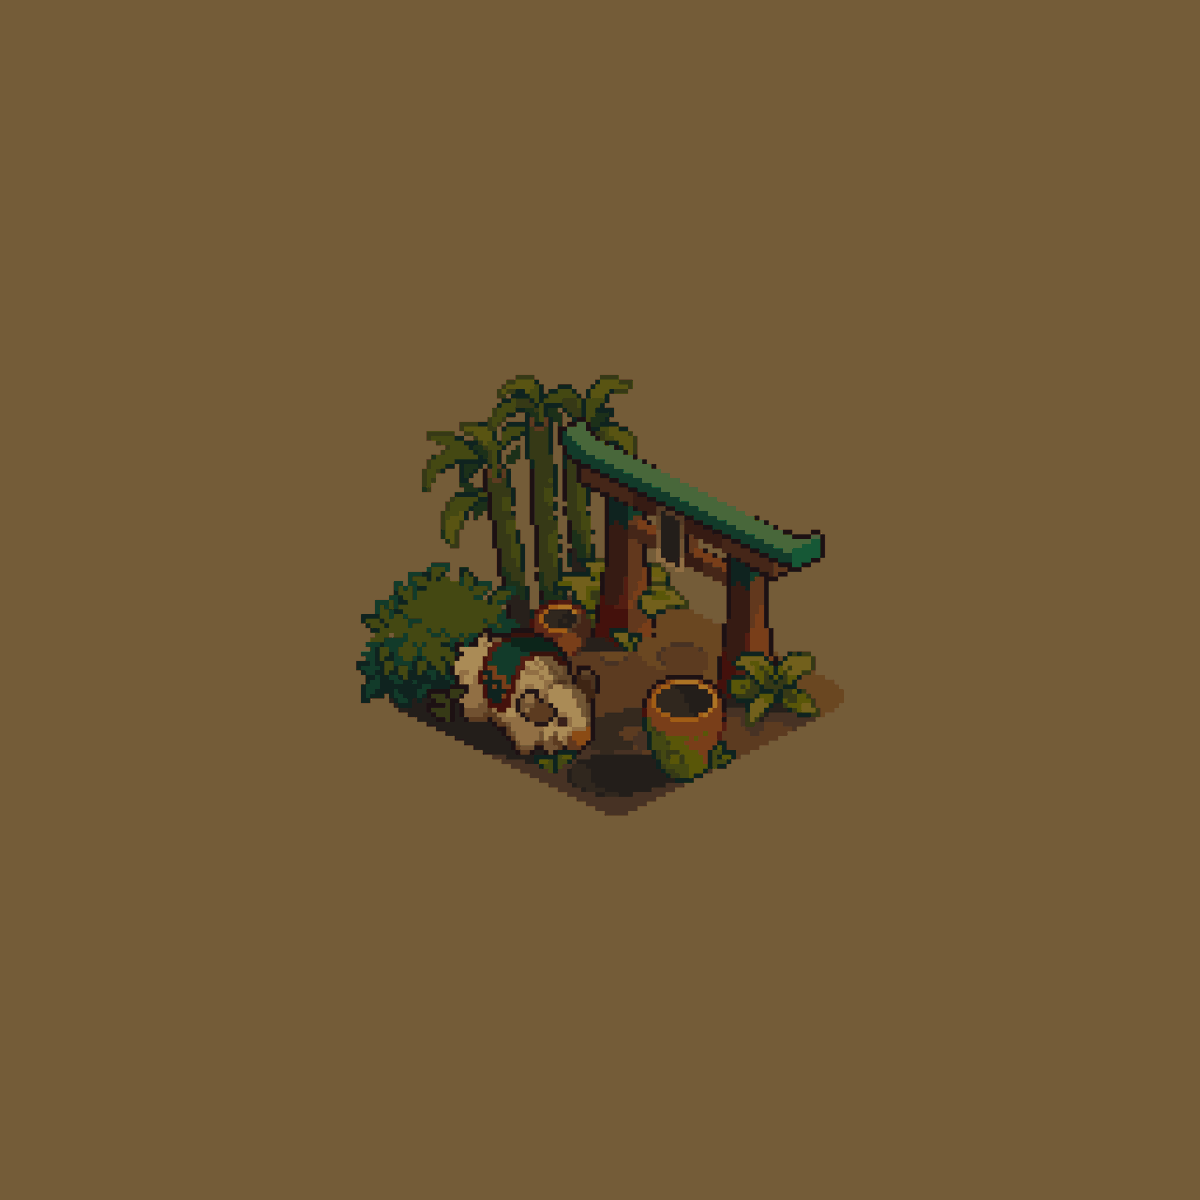 🌿| 𝑇ℎ𝑒 𝑤ℎ𝑖𝑡𝑒 𝑞𝑢𝑖𝑒𝑡 𝑌𝑎𝑘 |
For today I tried to create a little piece with a new palette I made by using the colors usually I like to see together trying to get a 'cozy' feel, hope you can appreciate it!
#pixelart #isometricart #cozy #pixel_dailies